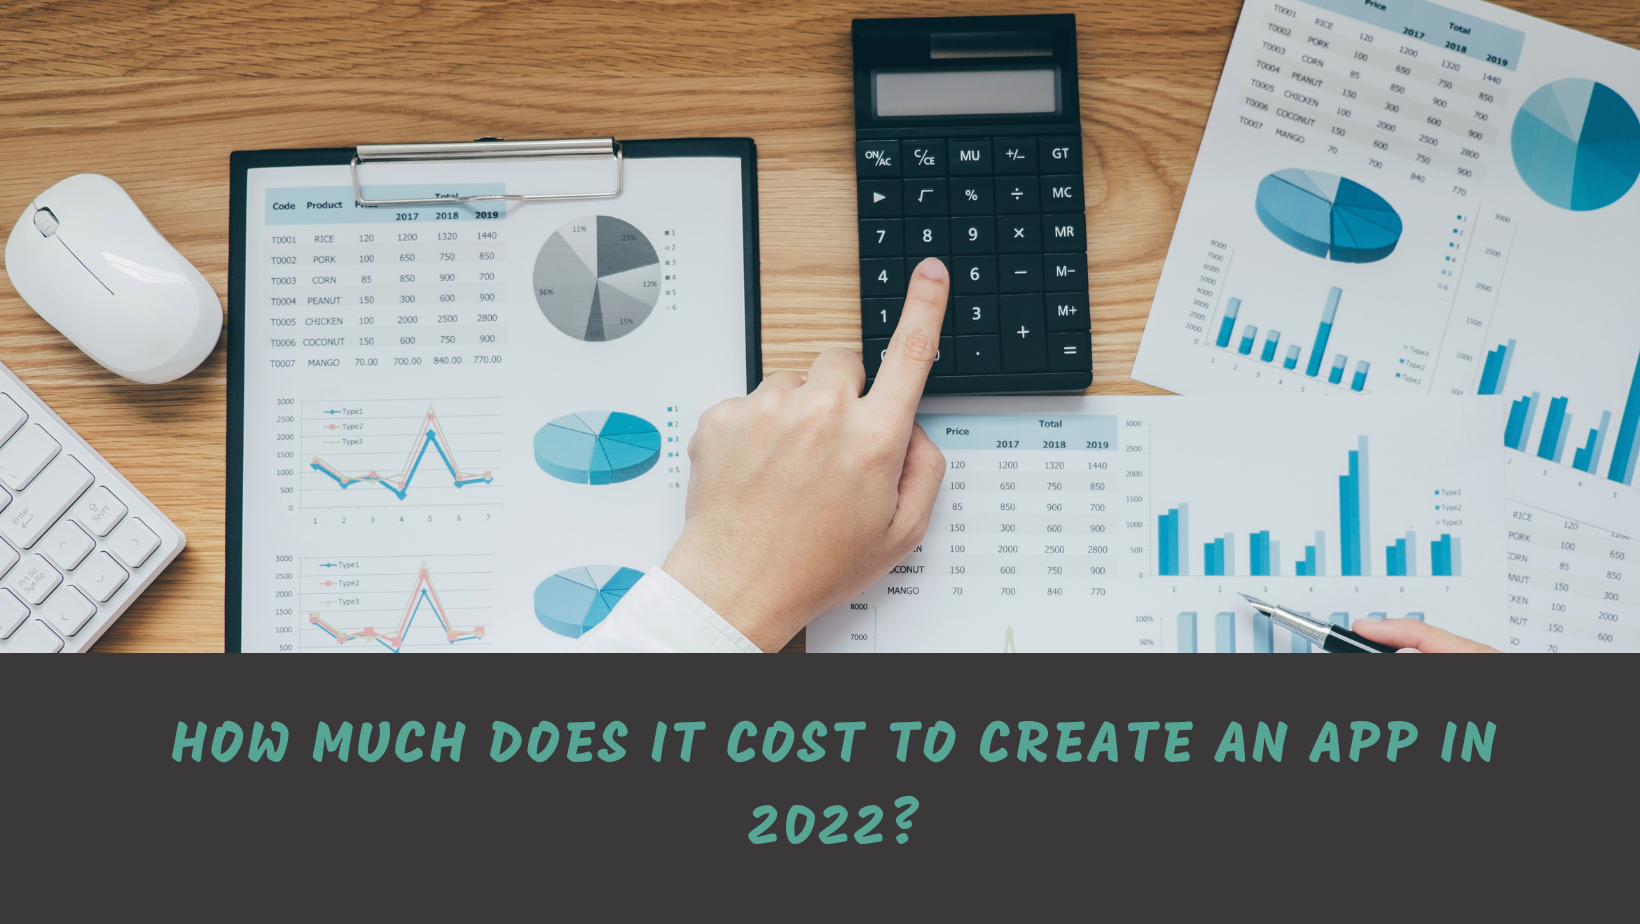 How much does it cost to create an app in 2022?